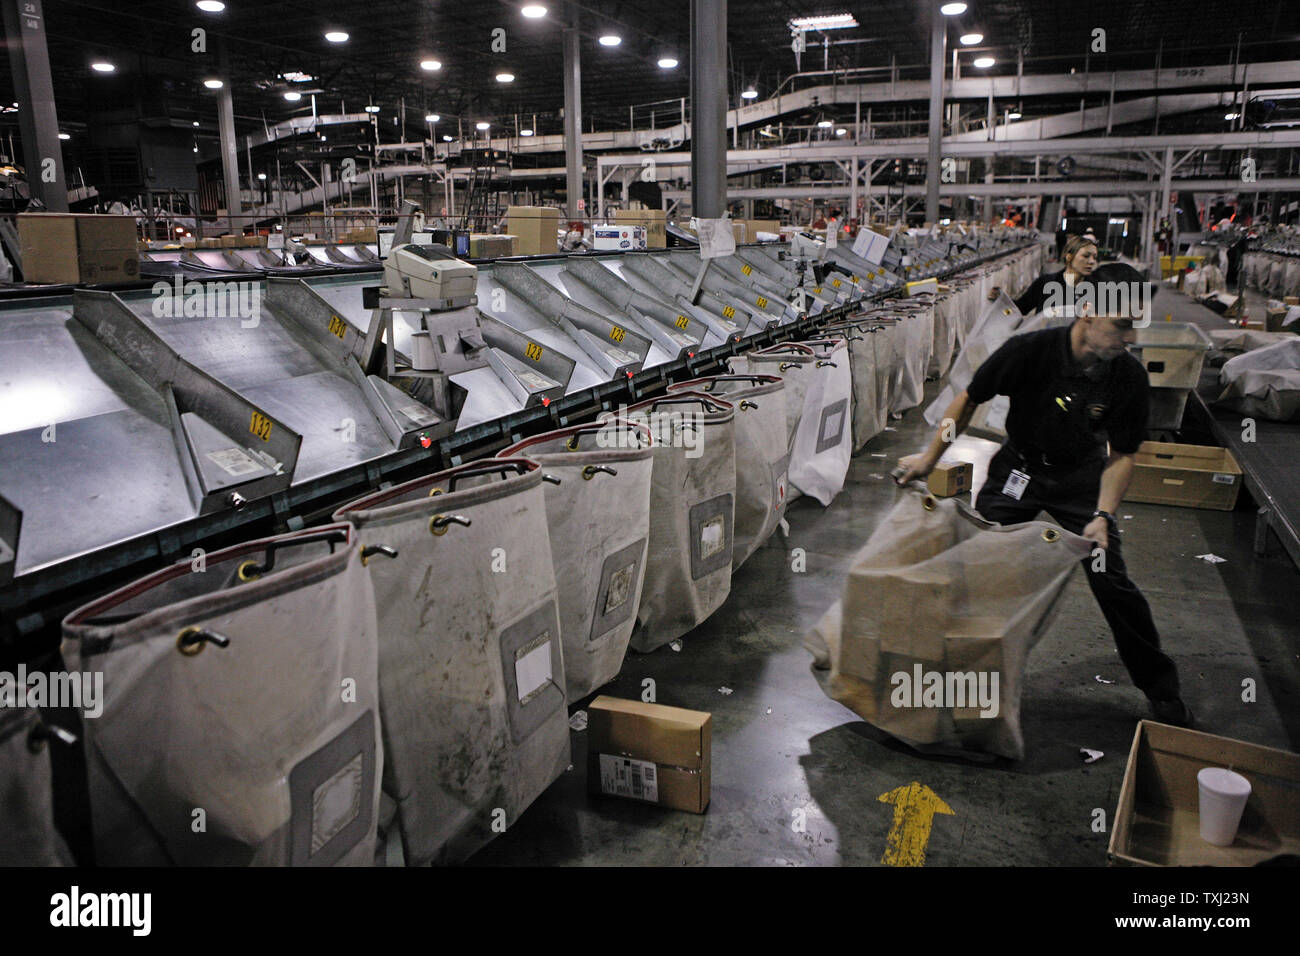 Victor Moreno, right, sorts packages at UPS' Chicago Area Consolidation Hub in Hodgkins, Illinois on December 15, 2006. UPS' Hodgkins location, which is the world's largest package sorting and distribution facility in terms of size and package volume, expects to handle 2 million packages Friday. (UPI Photo/Brian Kersey) Stock Photo